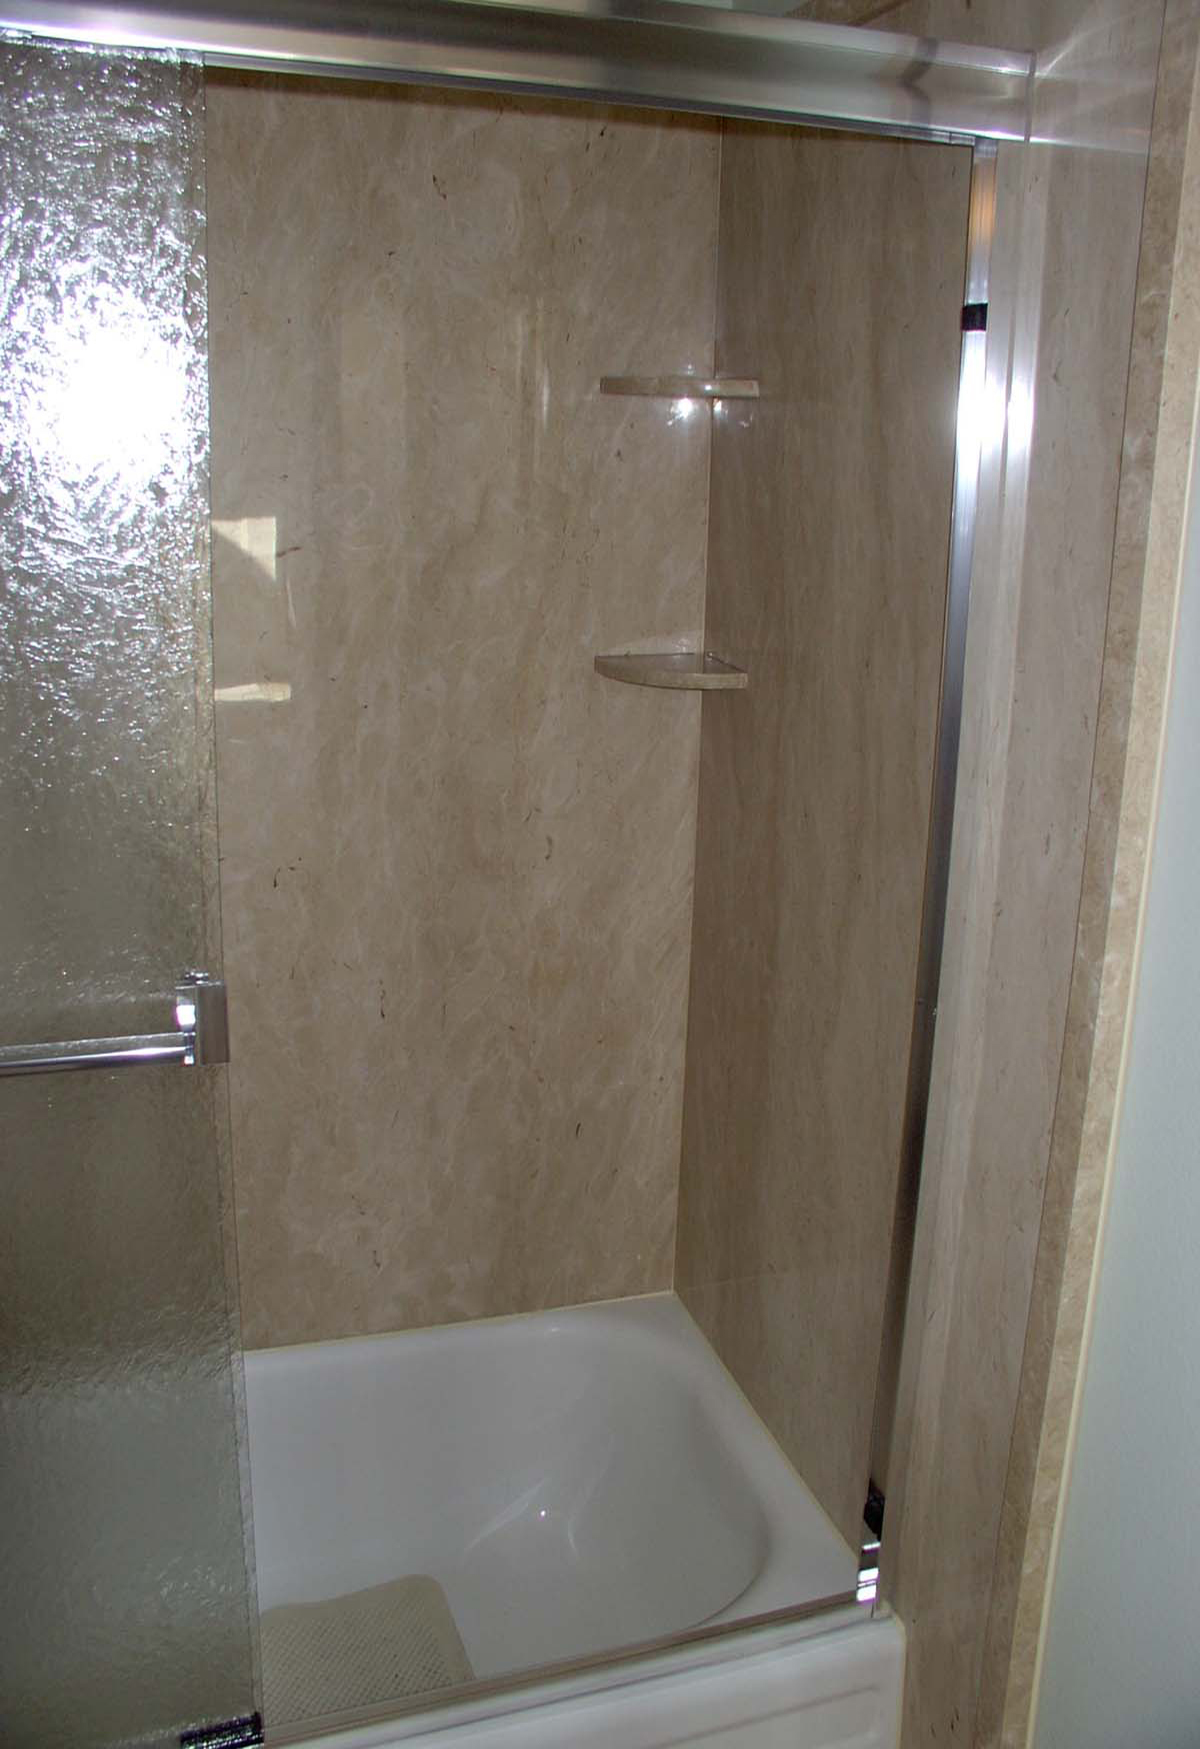 Marble Shower Surround Remodel with trim piece